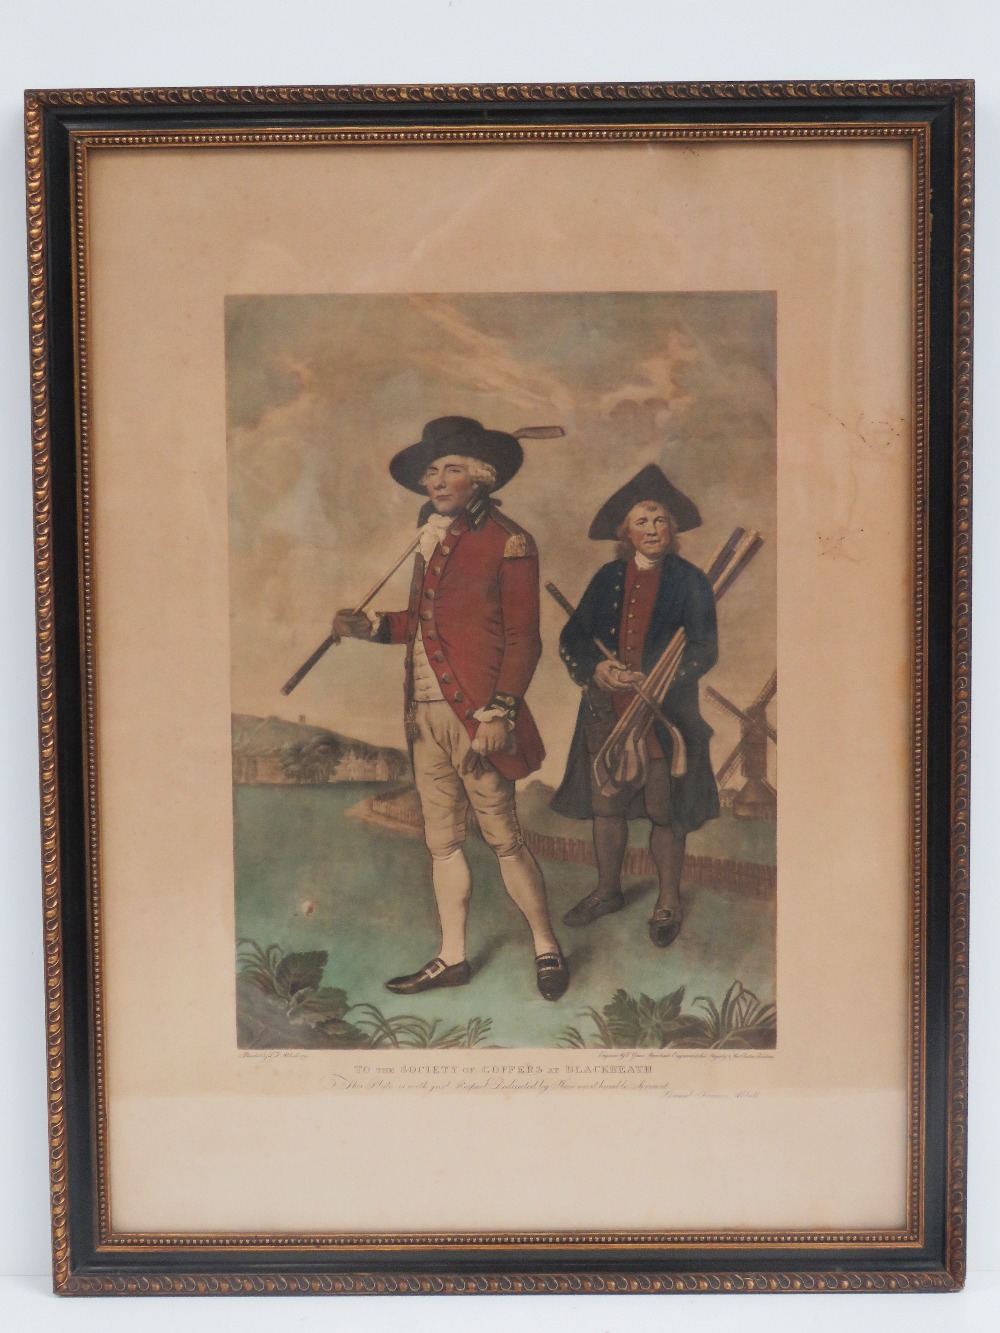 Coloured print 'To the Society of Goffers at Blackheath as painted by L J Abbot 1790',